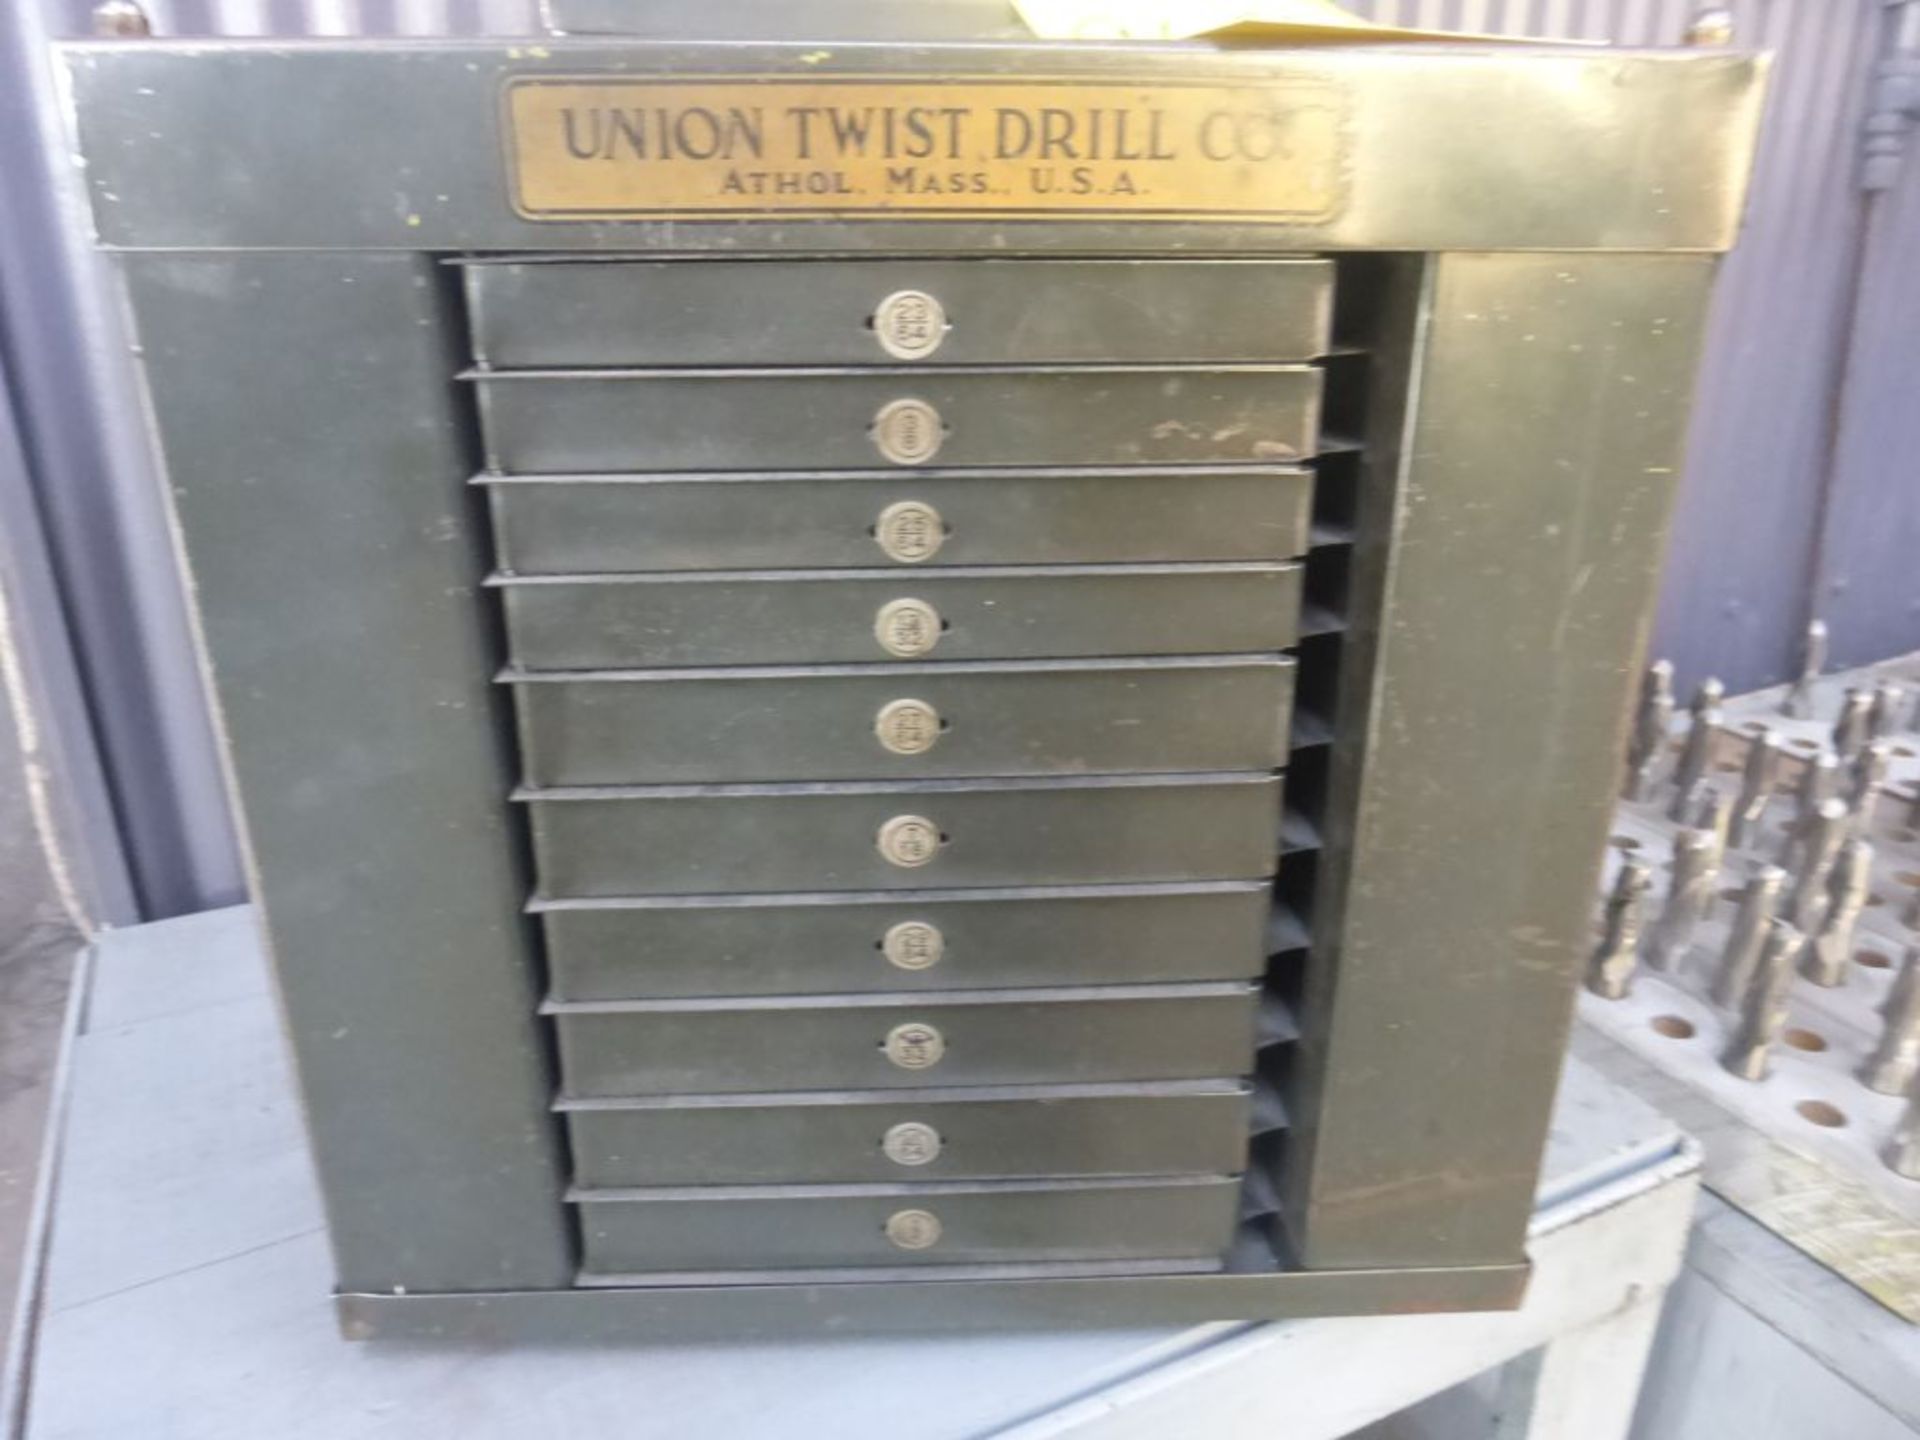 Union Twist Drill Co. Drill Bit Carousel w/Drill Contents | 4-Sided Multi Drawer; Tag: 229631 - Image 2 of 25